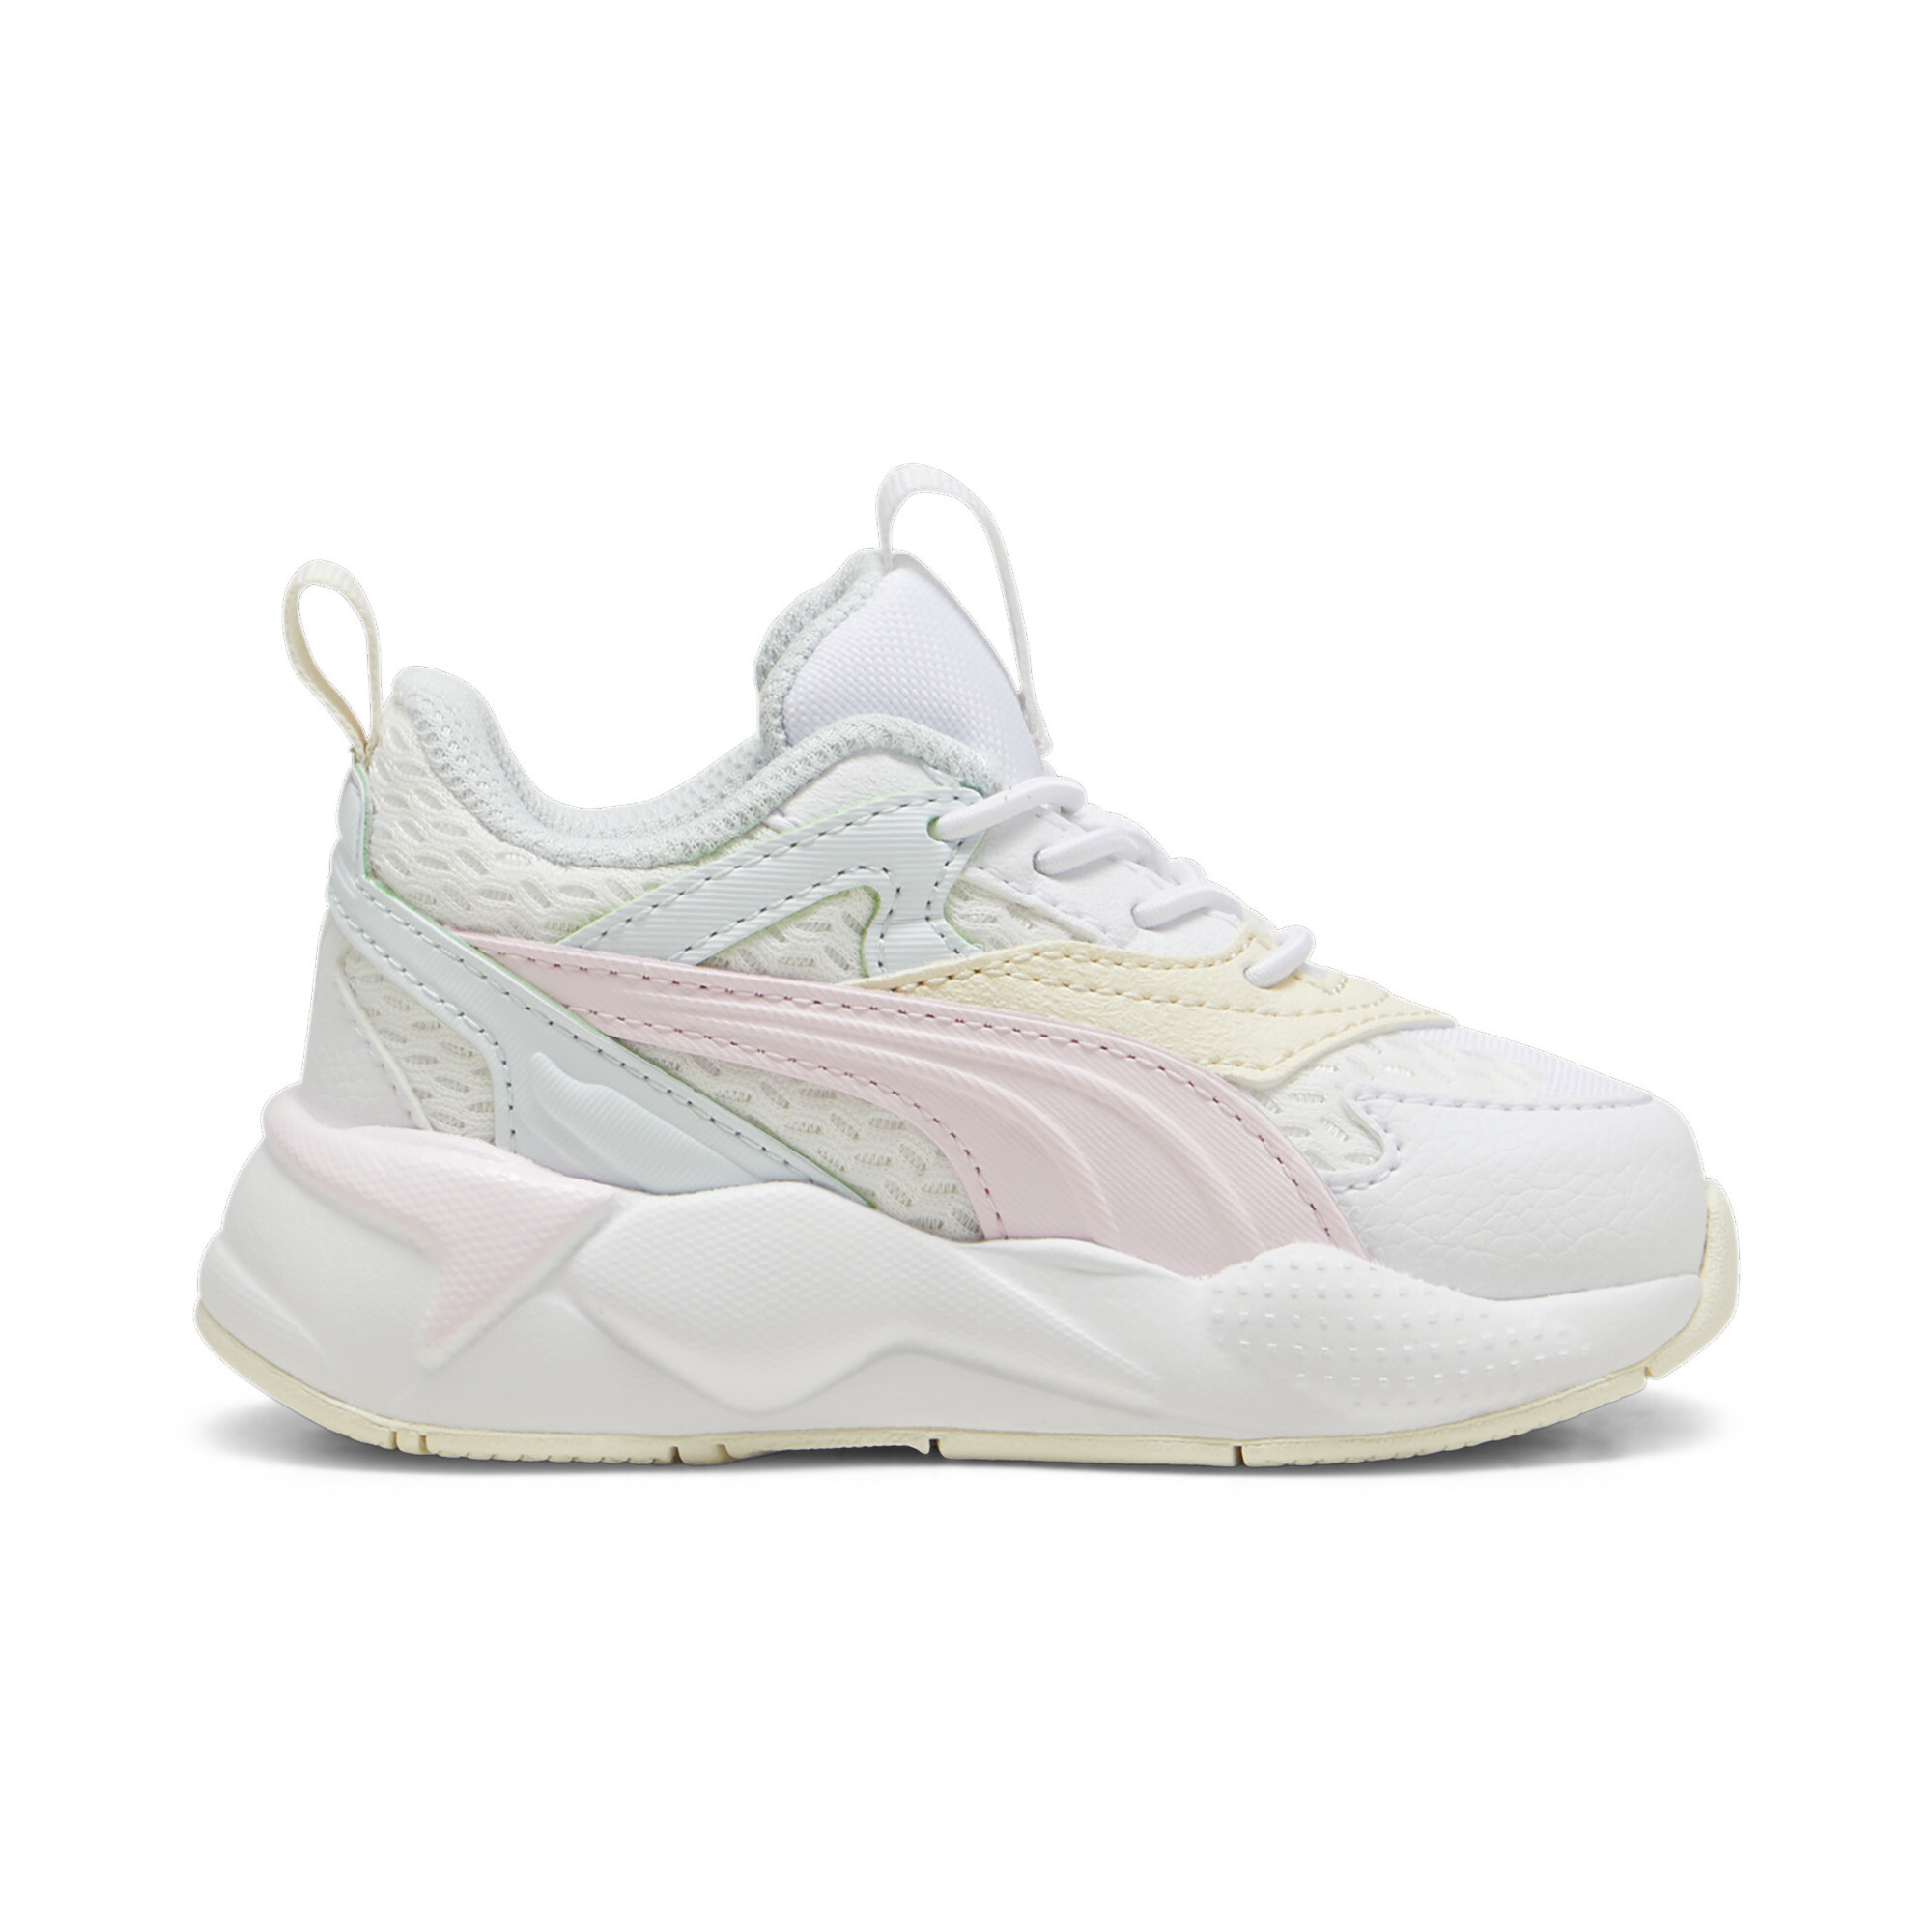 Puma RS-X Efekt Toddlers' Sneakers, White, Size 24, Shoes